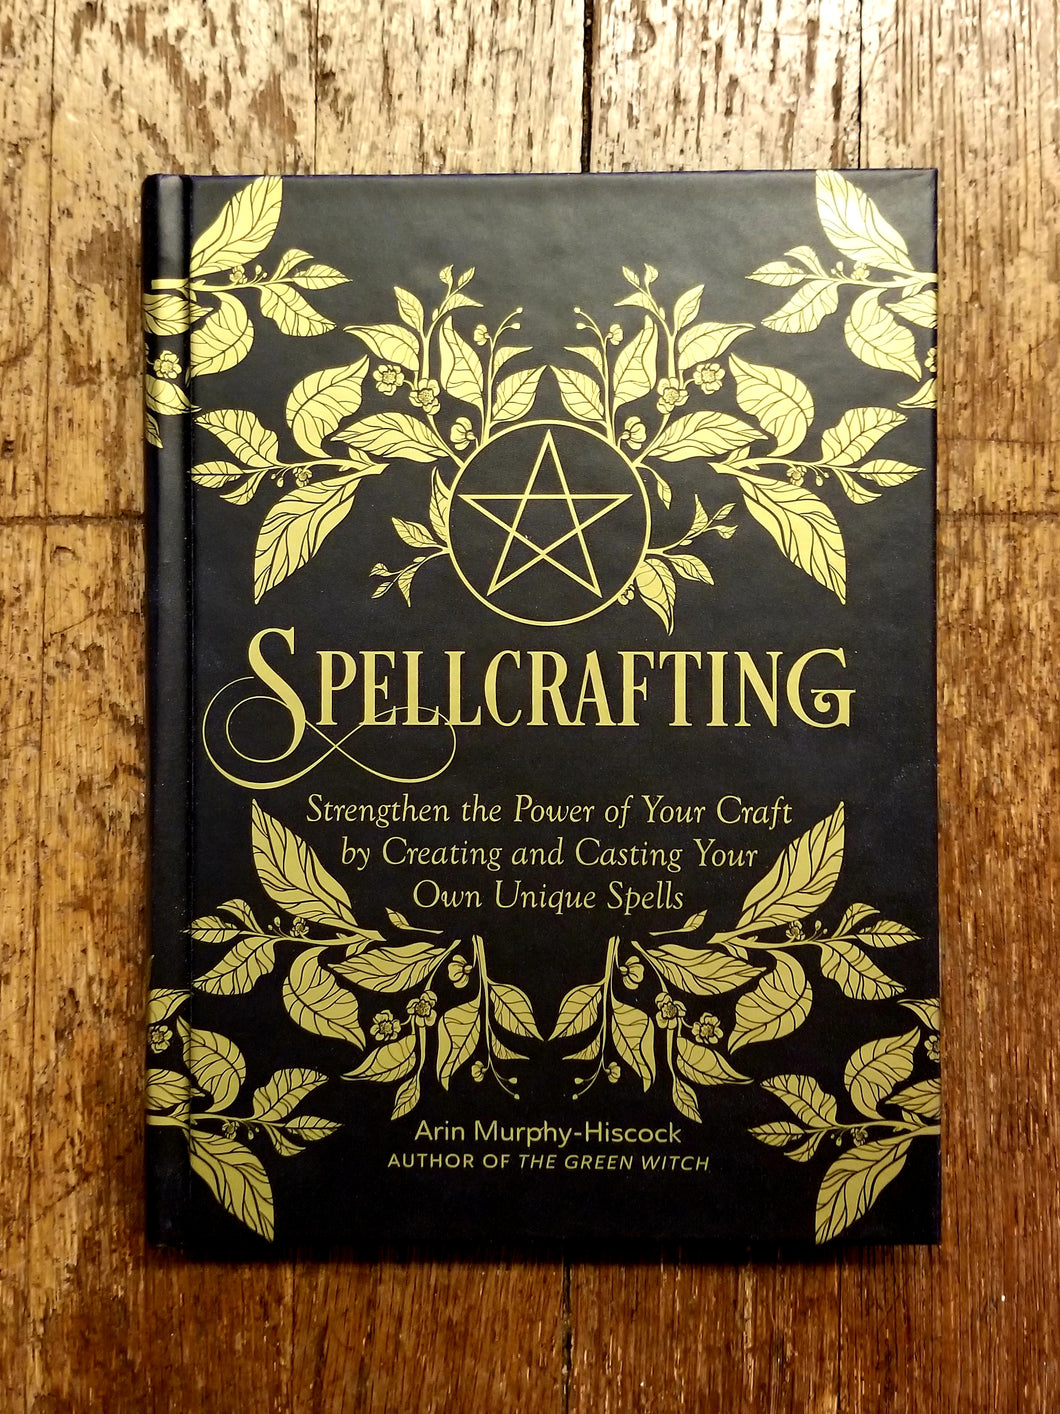 Spellcrafting: Strengthen the Power of Your Craft by Creating and Casting Your Own Unique Spells by  Arin Murphy-Hiscock